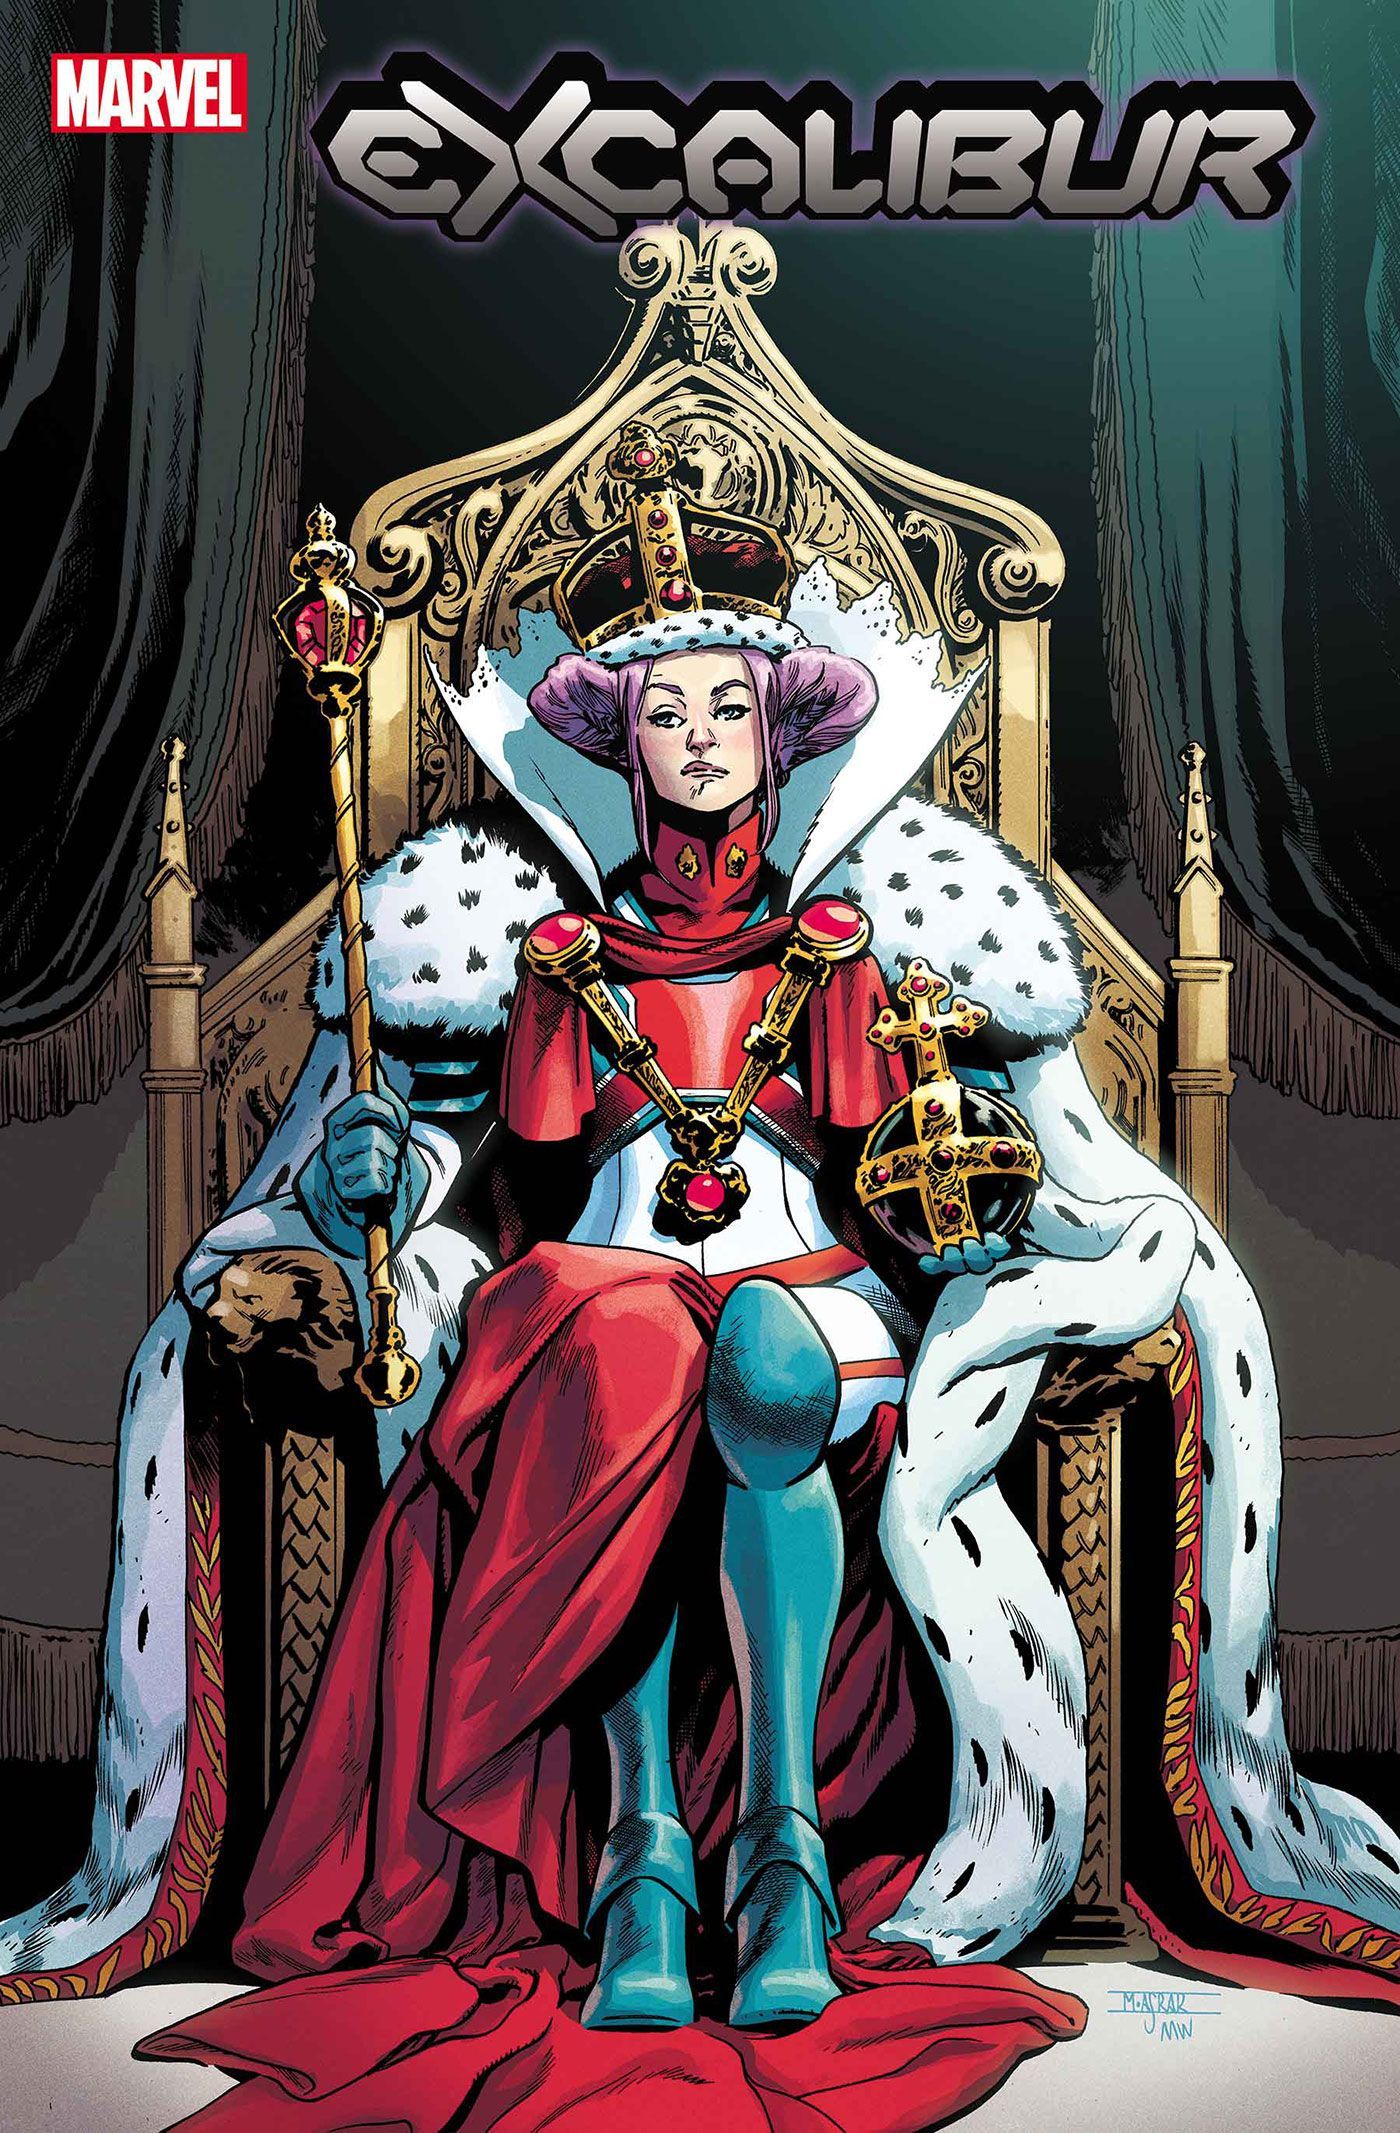 Captain Britain is The Next Queen of England in Marvel Comics